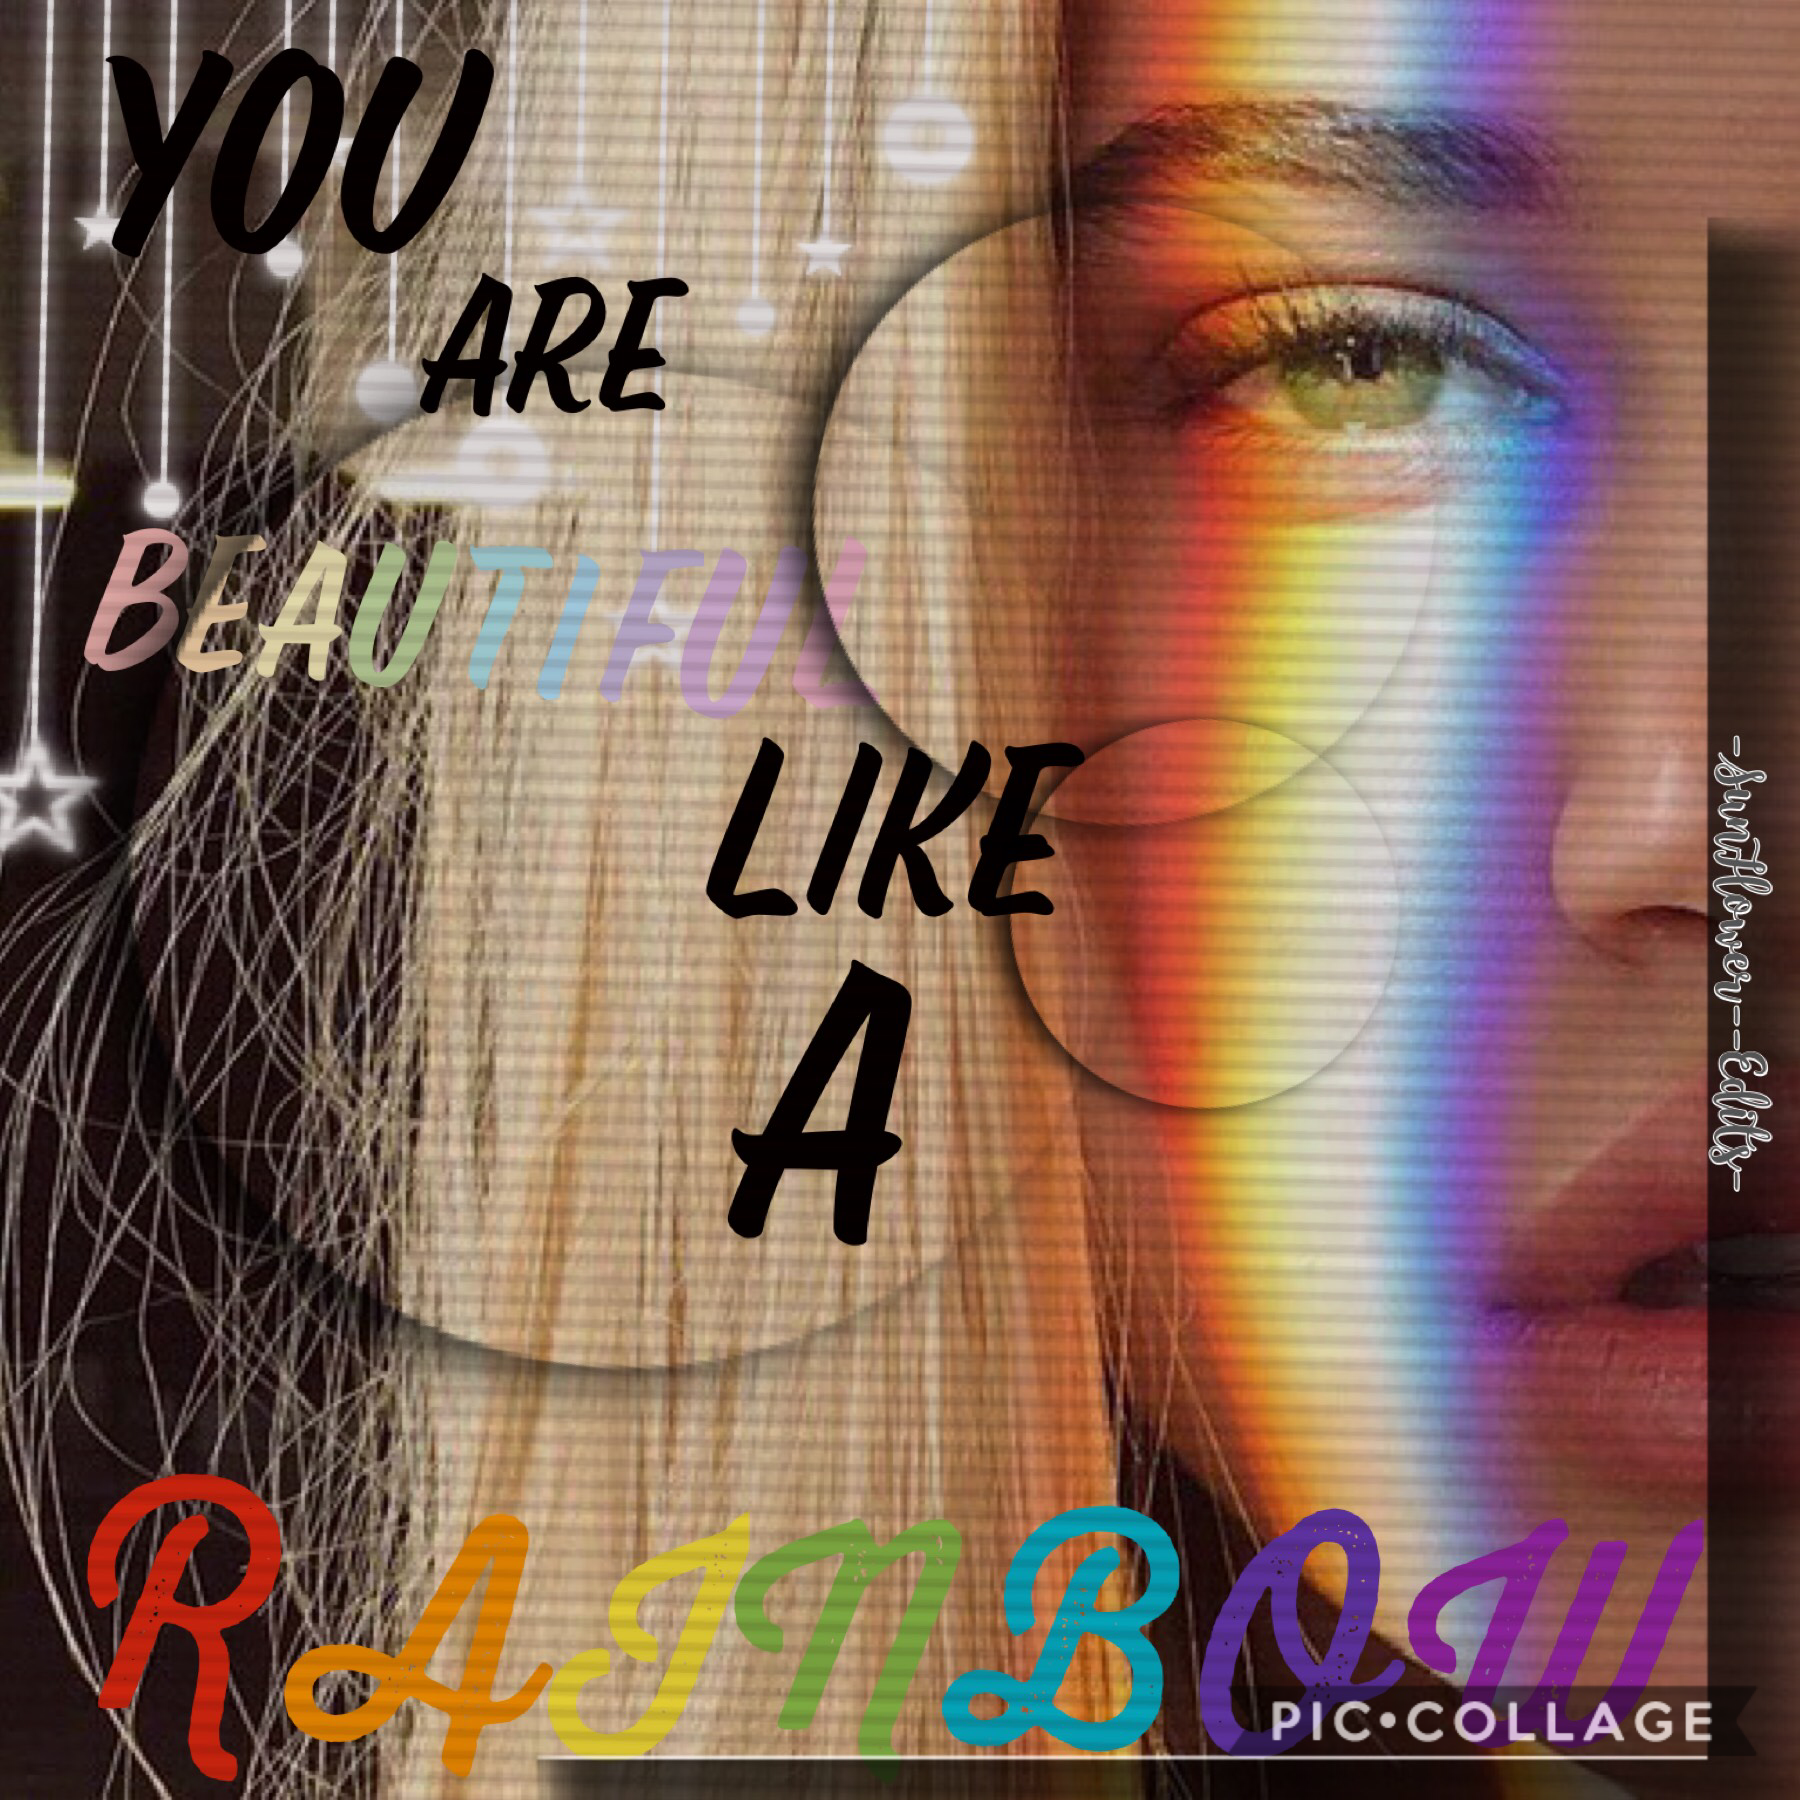 🏳️‍🌈TAPPYYYYY🏳️‍🌈

Heyyy soooo this is my first rainbow edit I did yesterday when Pic Collage wouldn’t work (signing in) I was inspired by my sexuality (Fun fact I’m bi) Annnddddd a few others (someone who use to be my crush is pansexual and someone else 